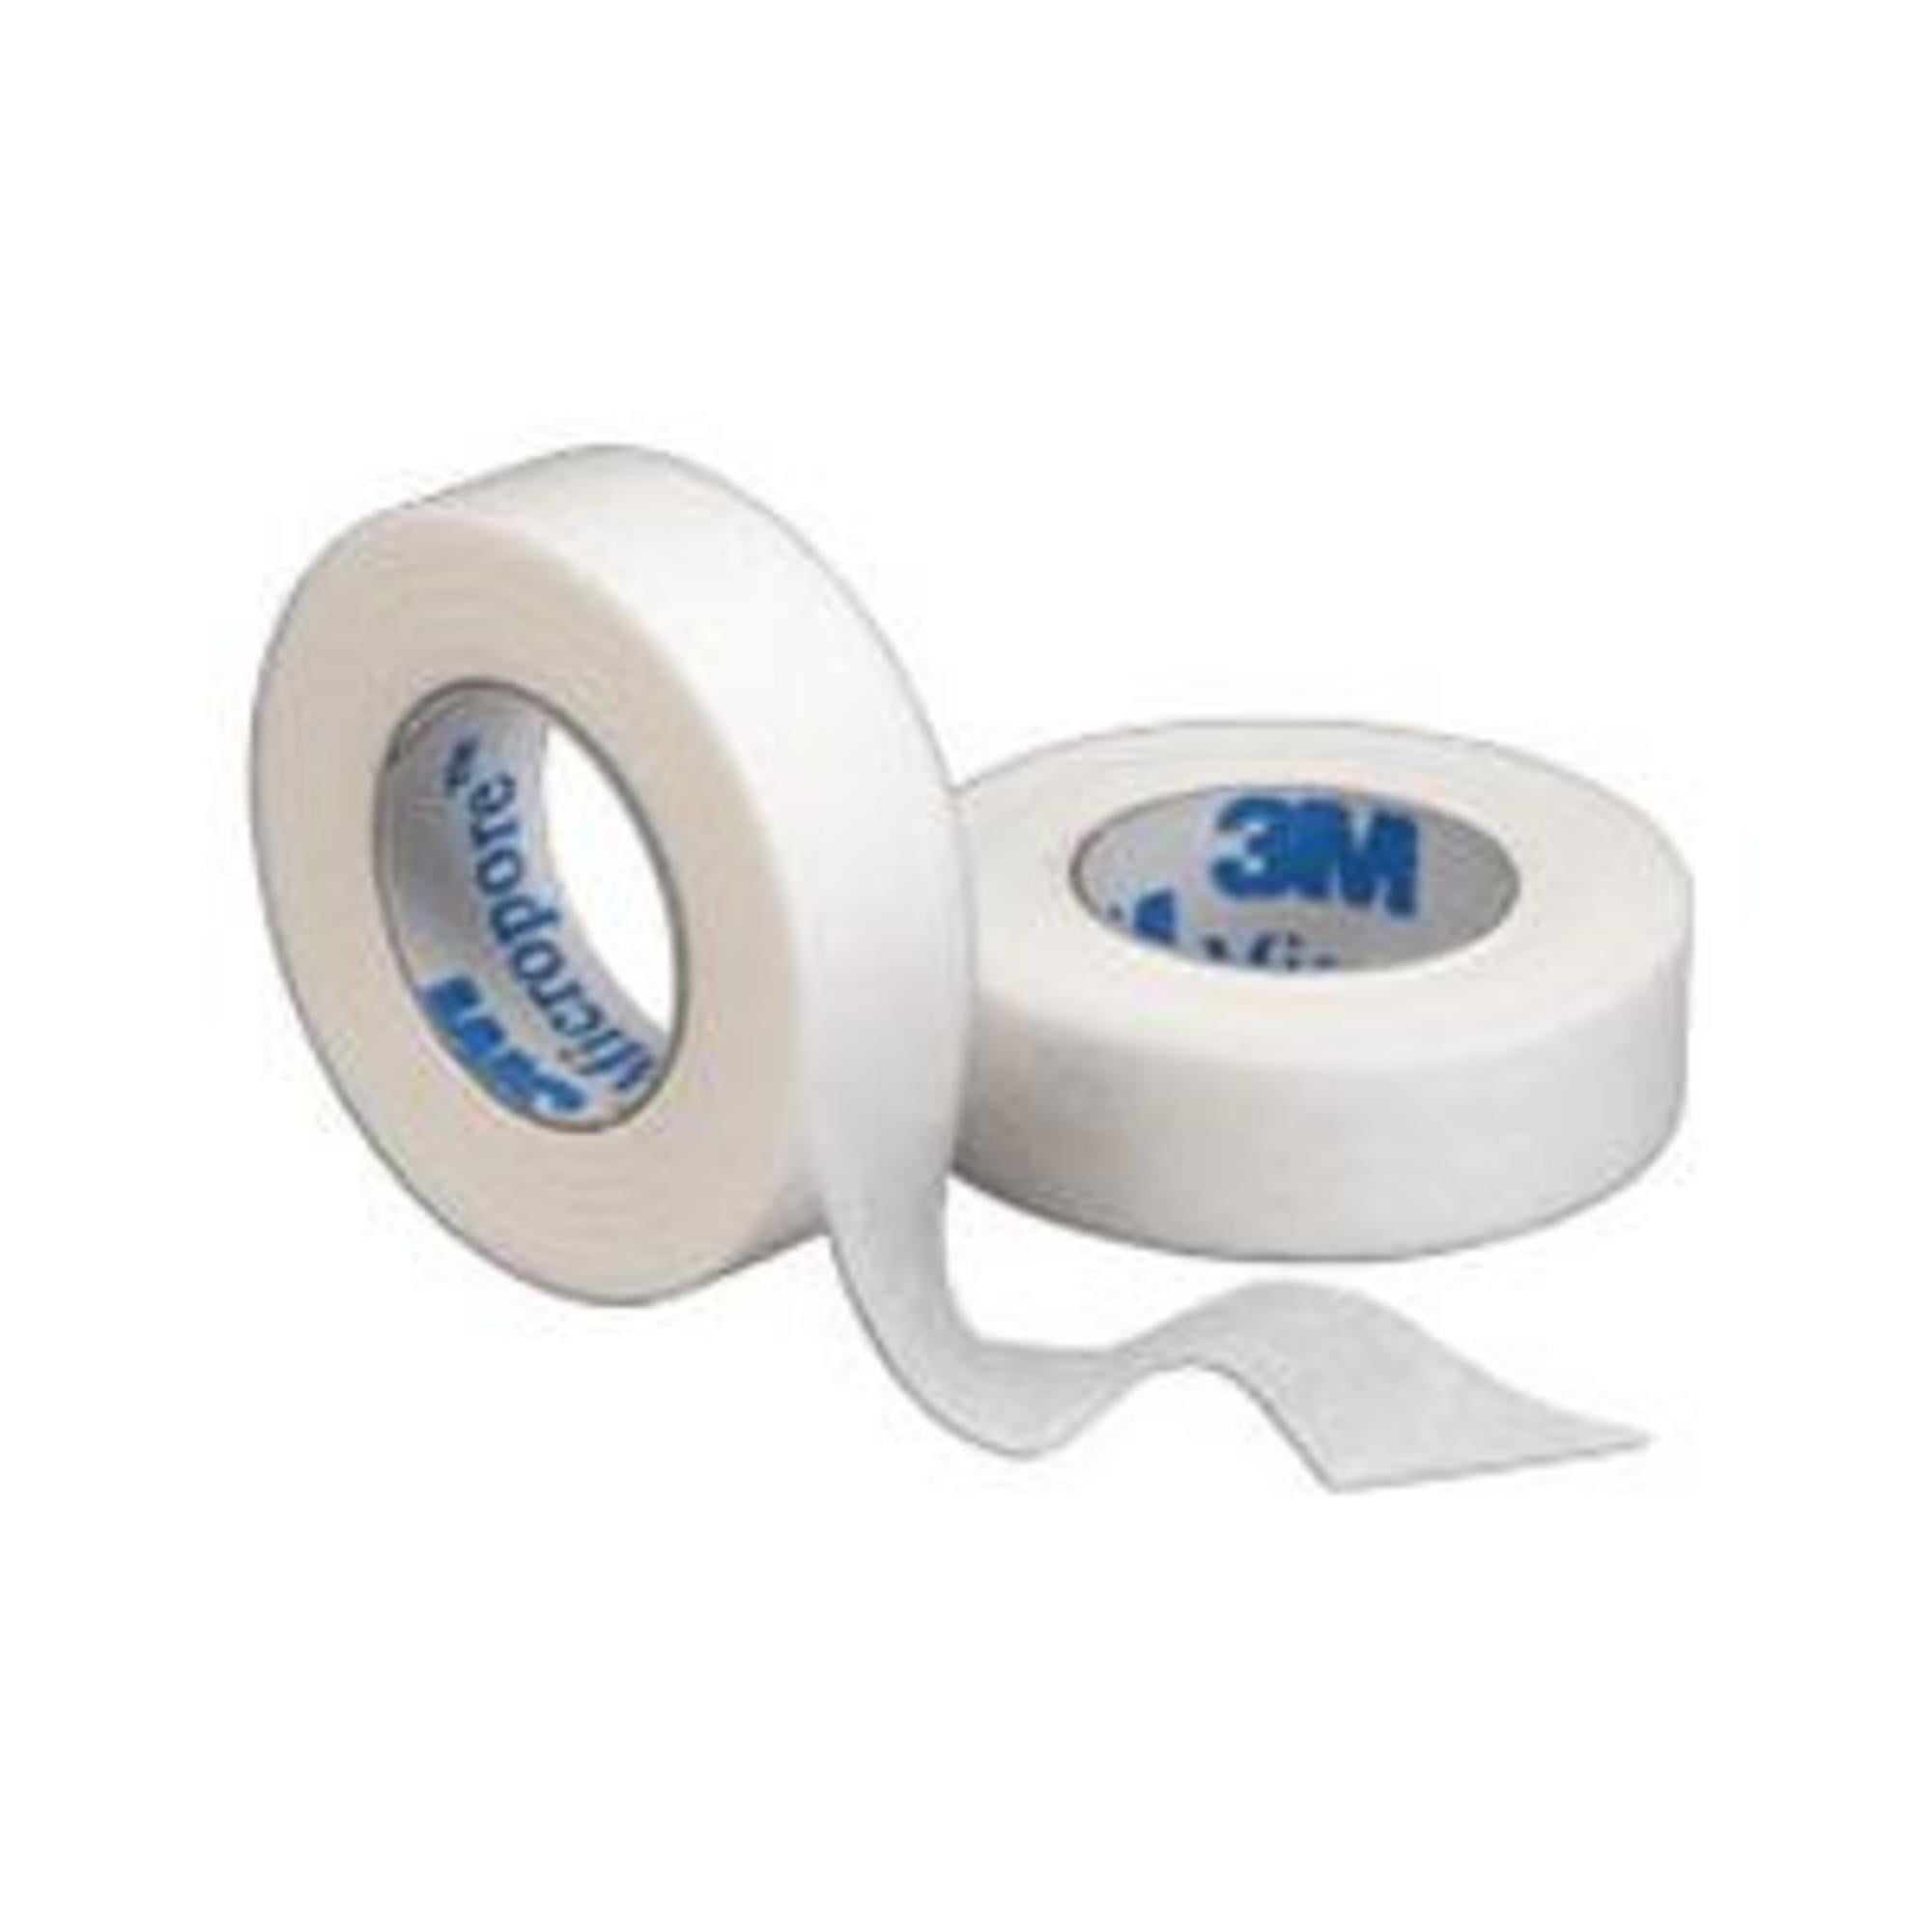  3m Medipore Tape 2 Inch Perforated